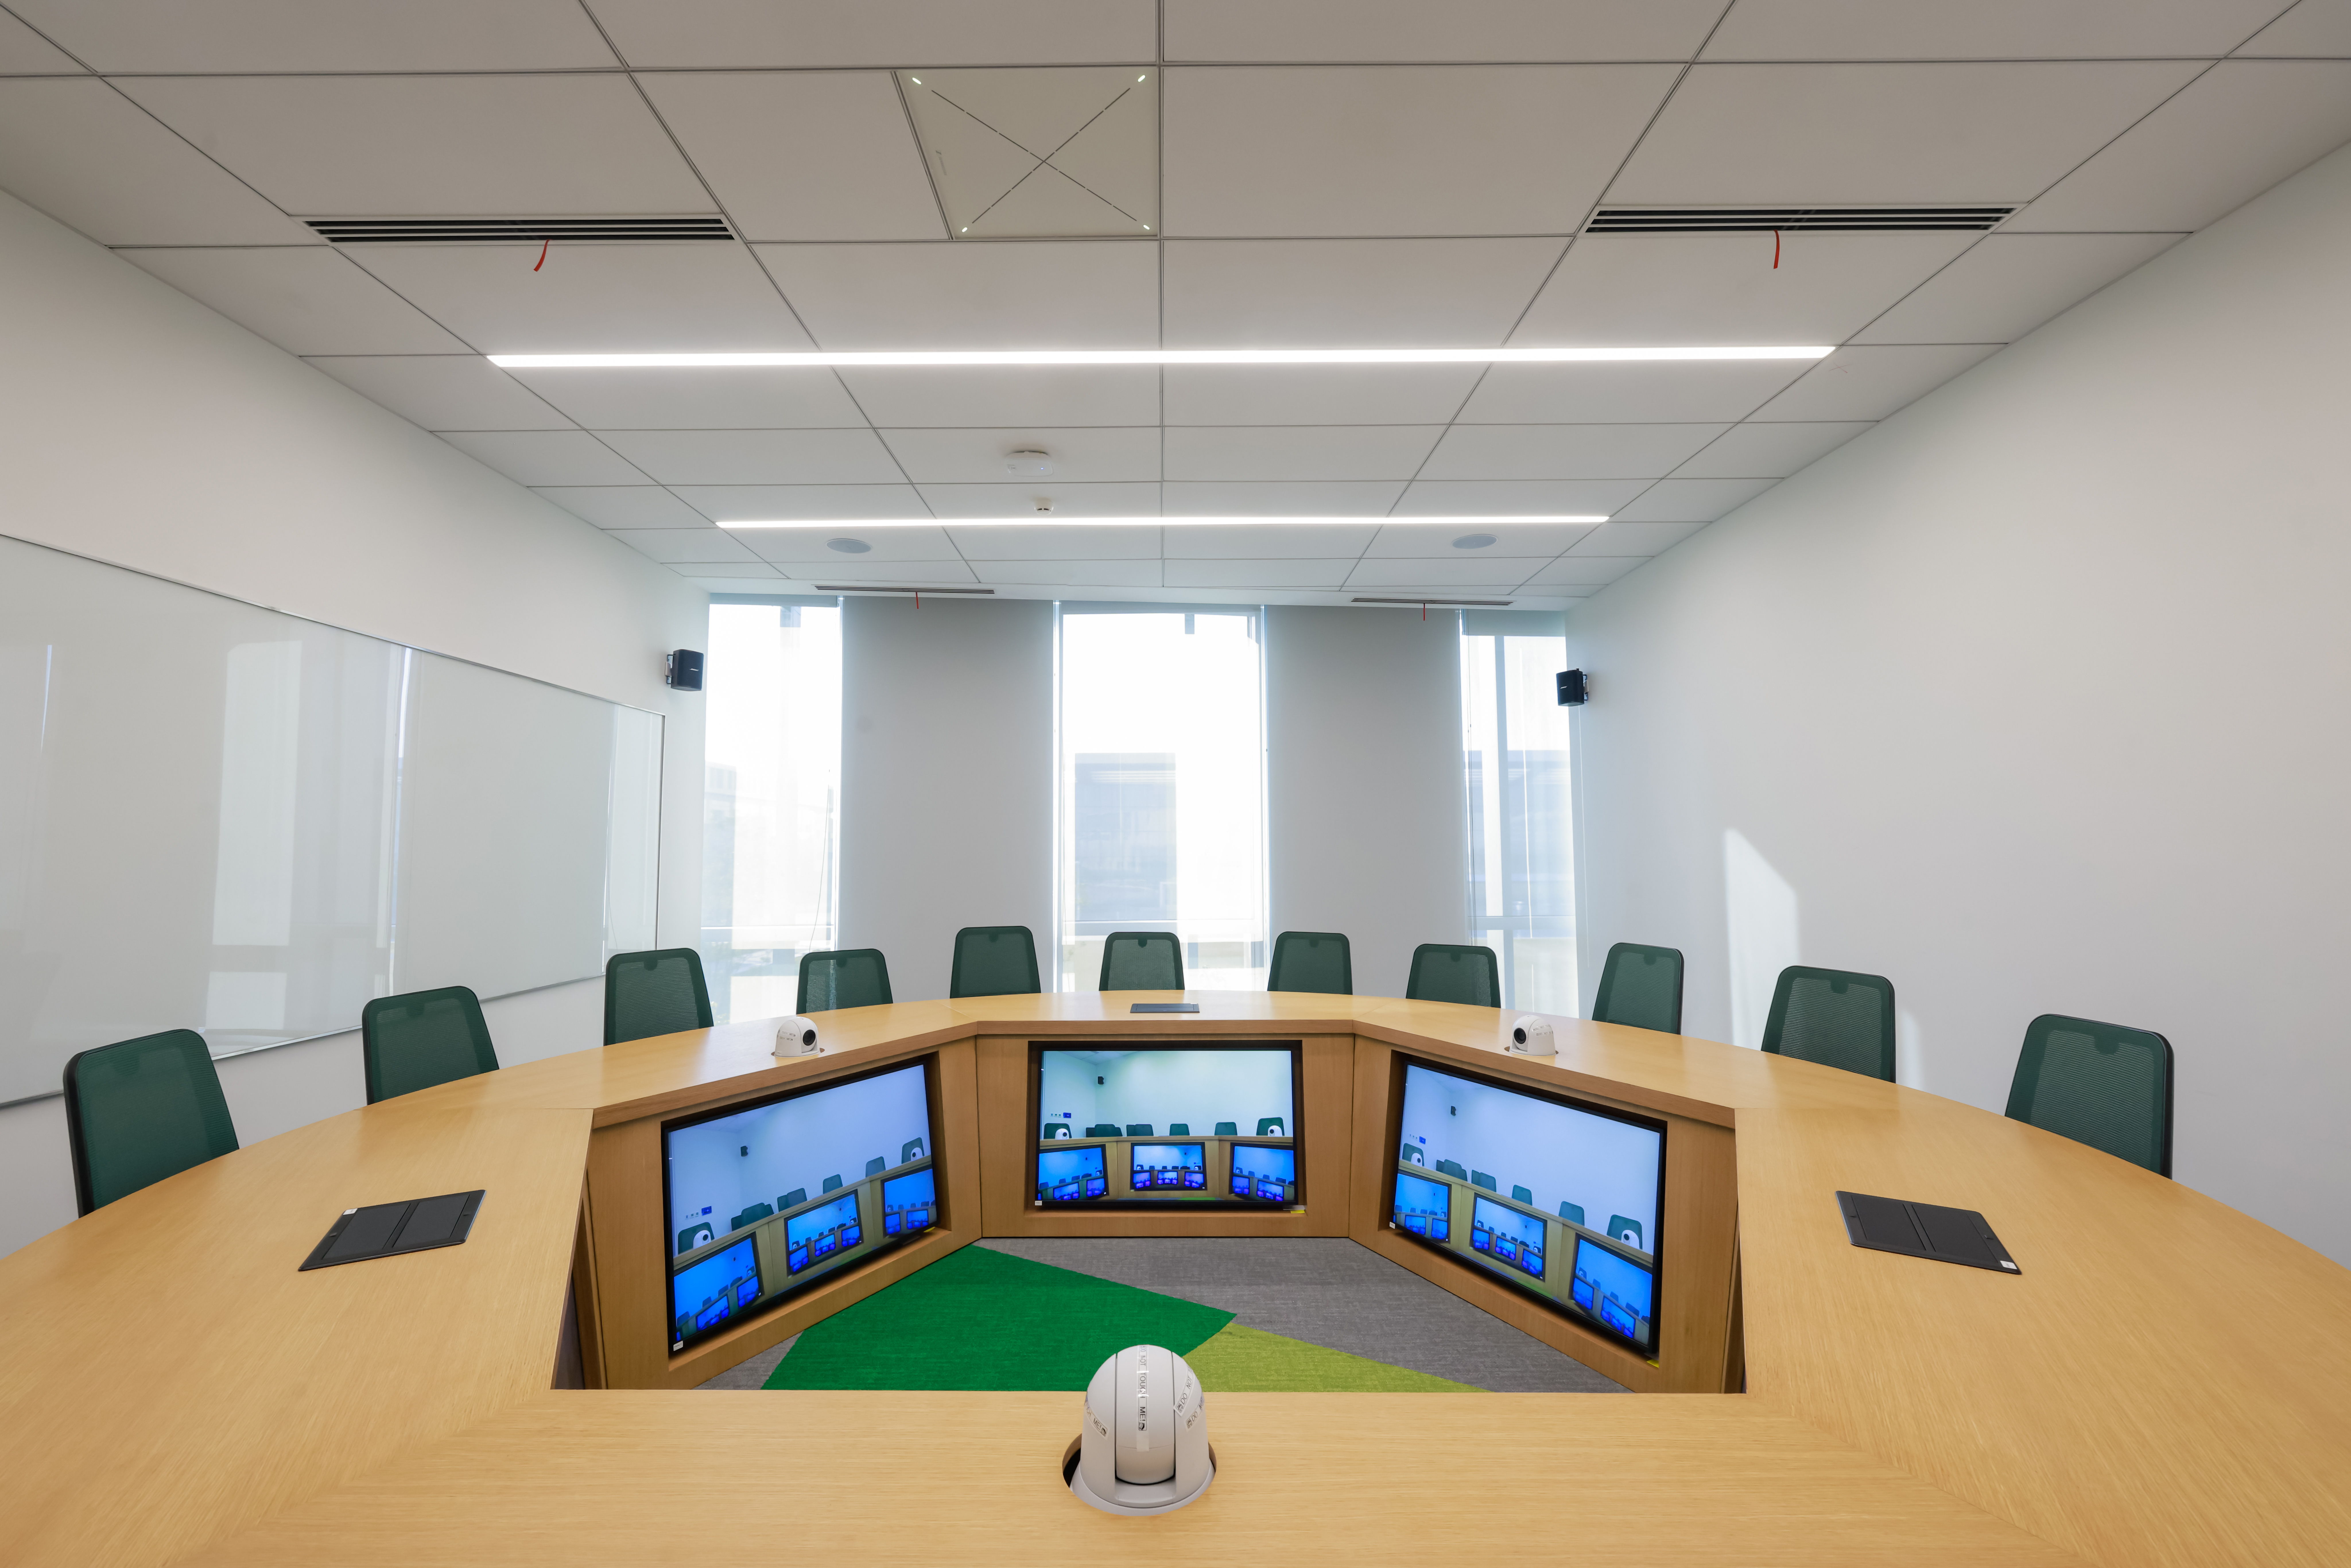 TCC 2 synchronizes the monitored speaker's position to the camera, thus switching footage in real time, making teaching and conferencing more realistic, efficient and immersive.